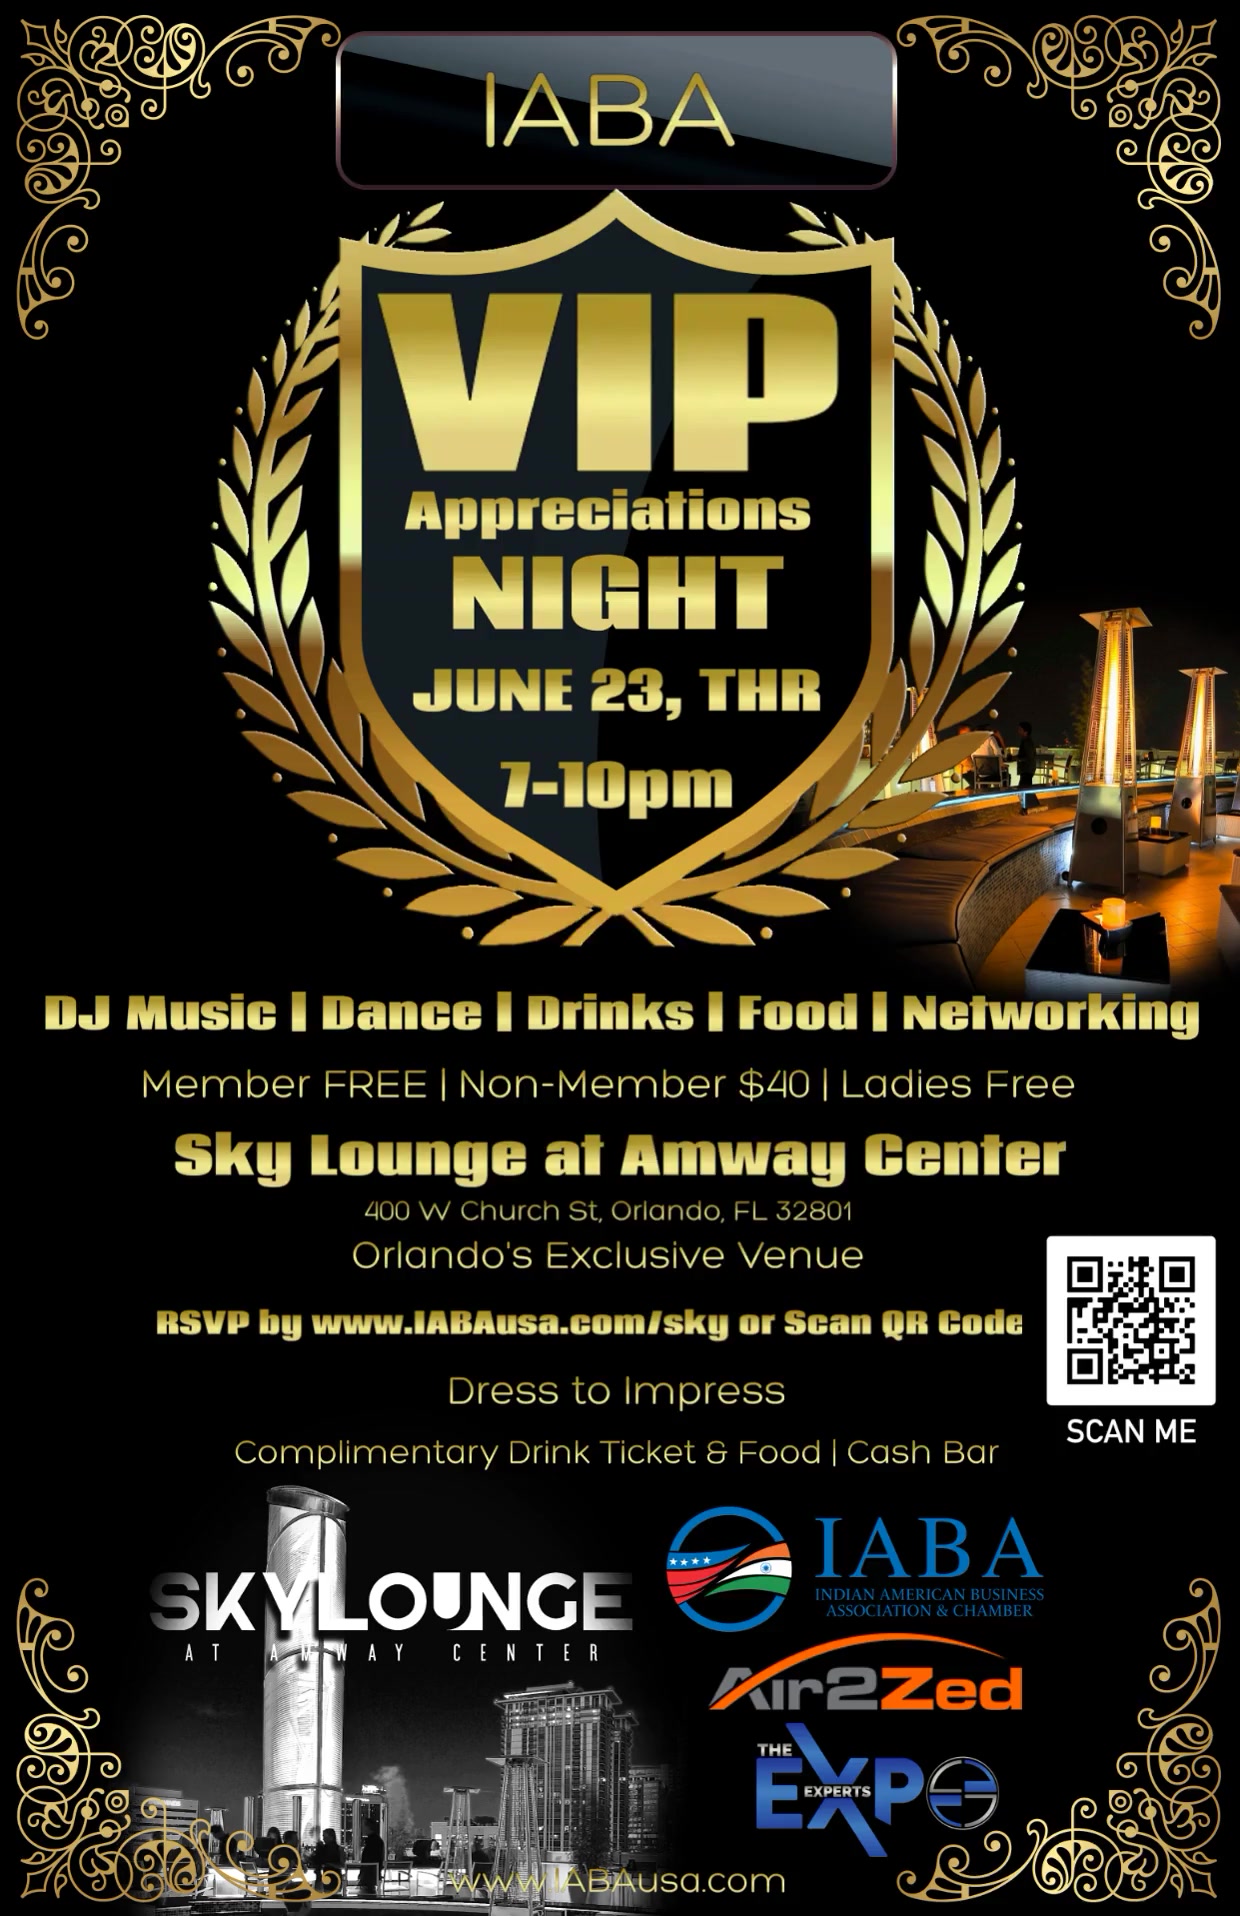 IABA VIP Night & Dental Industry Meet- June 23rd @7pm | Sky Lounge at Amway Center